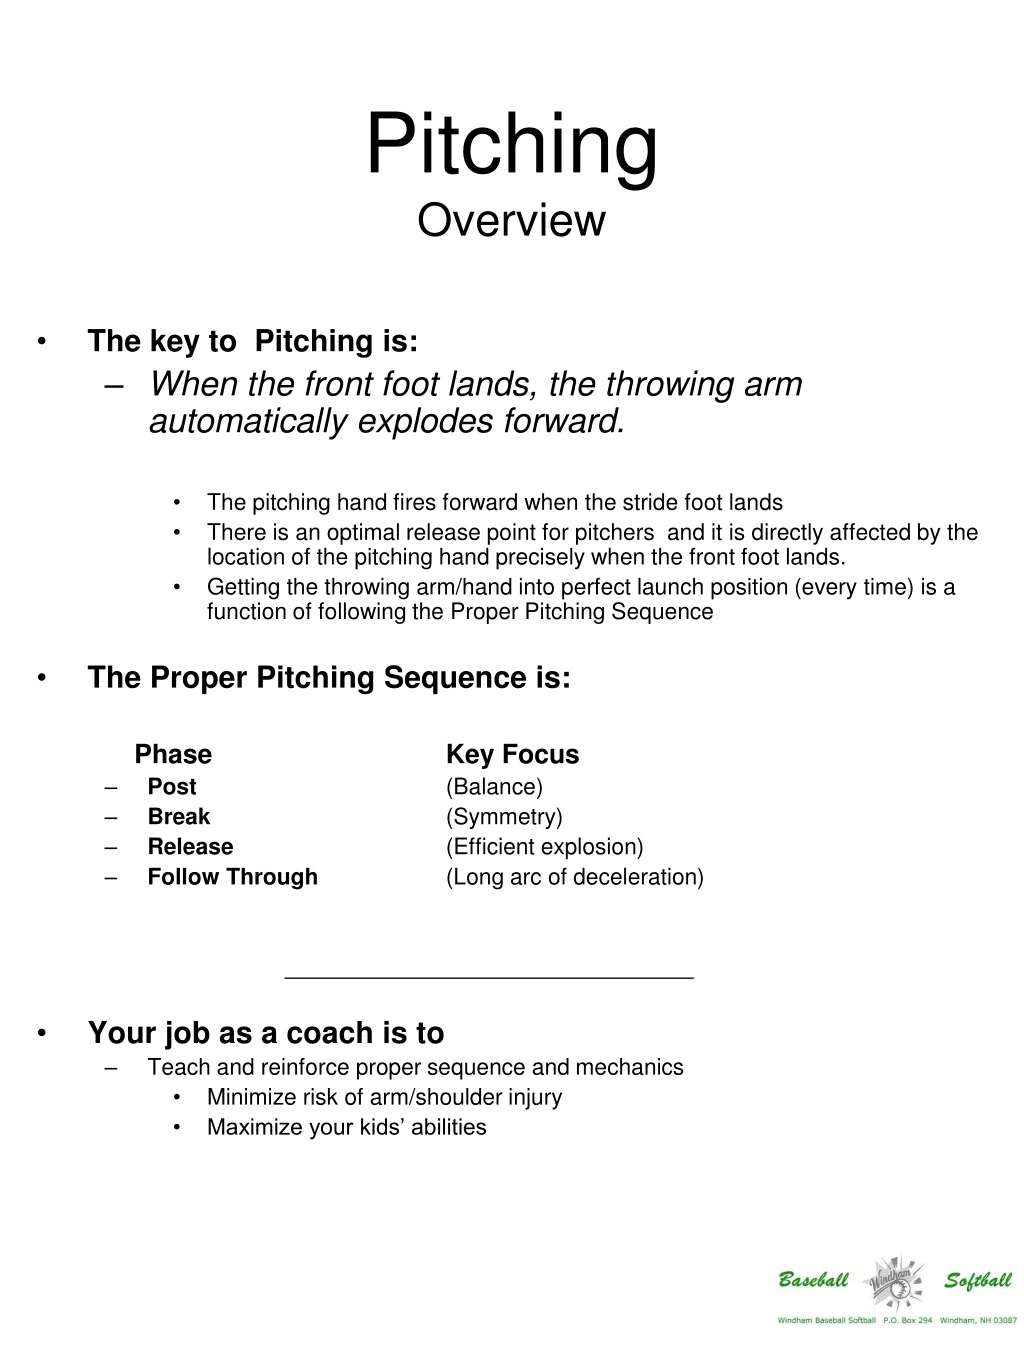 pitching overview